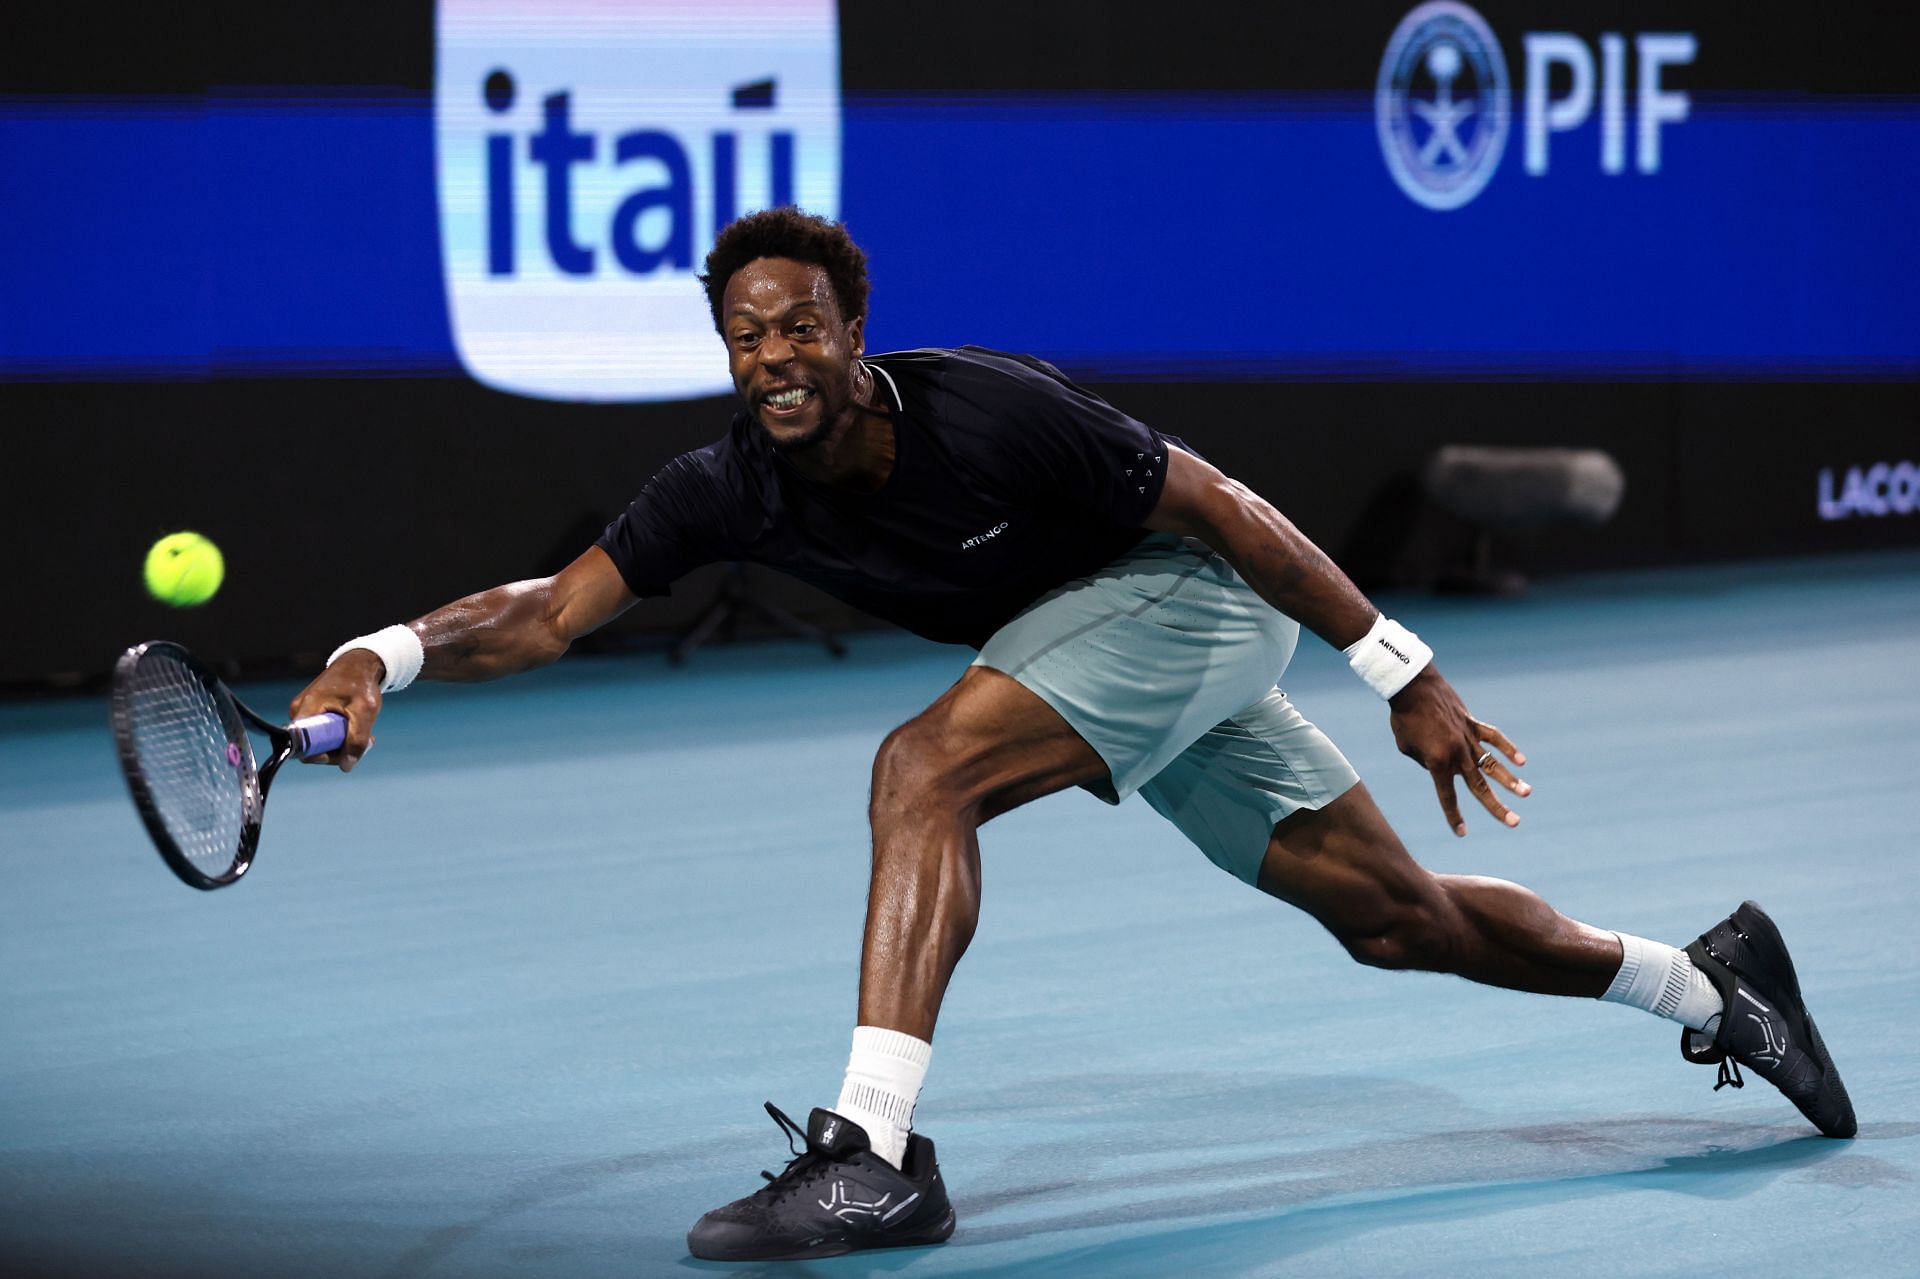 Gael Monfils in action at the Miami Open